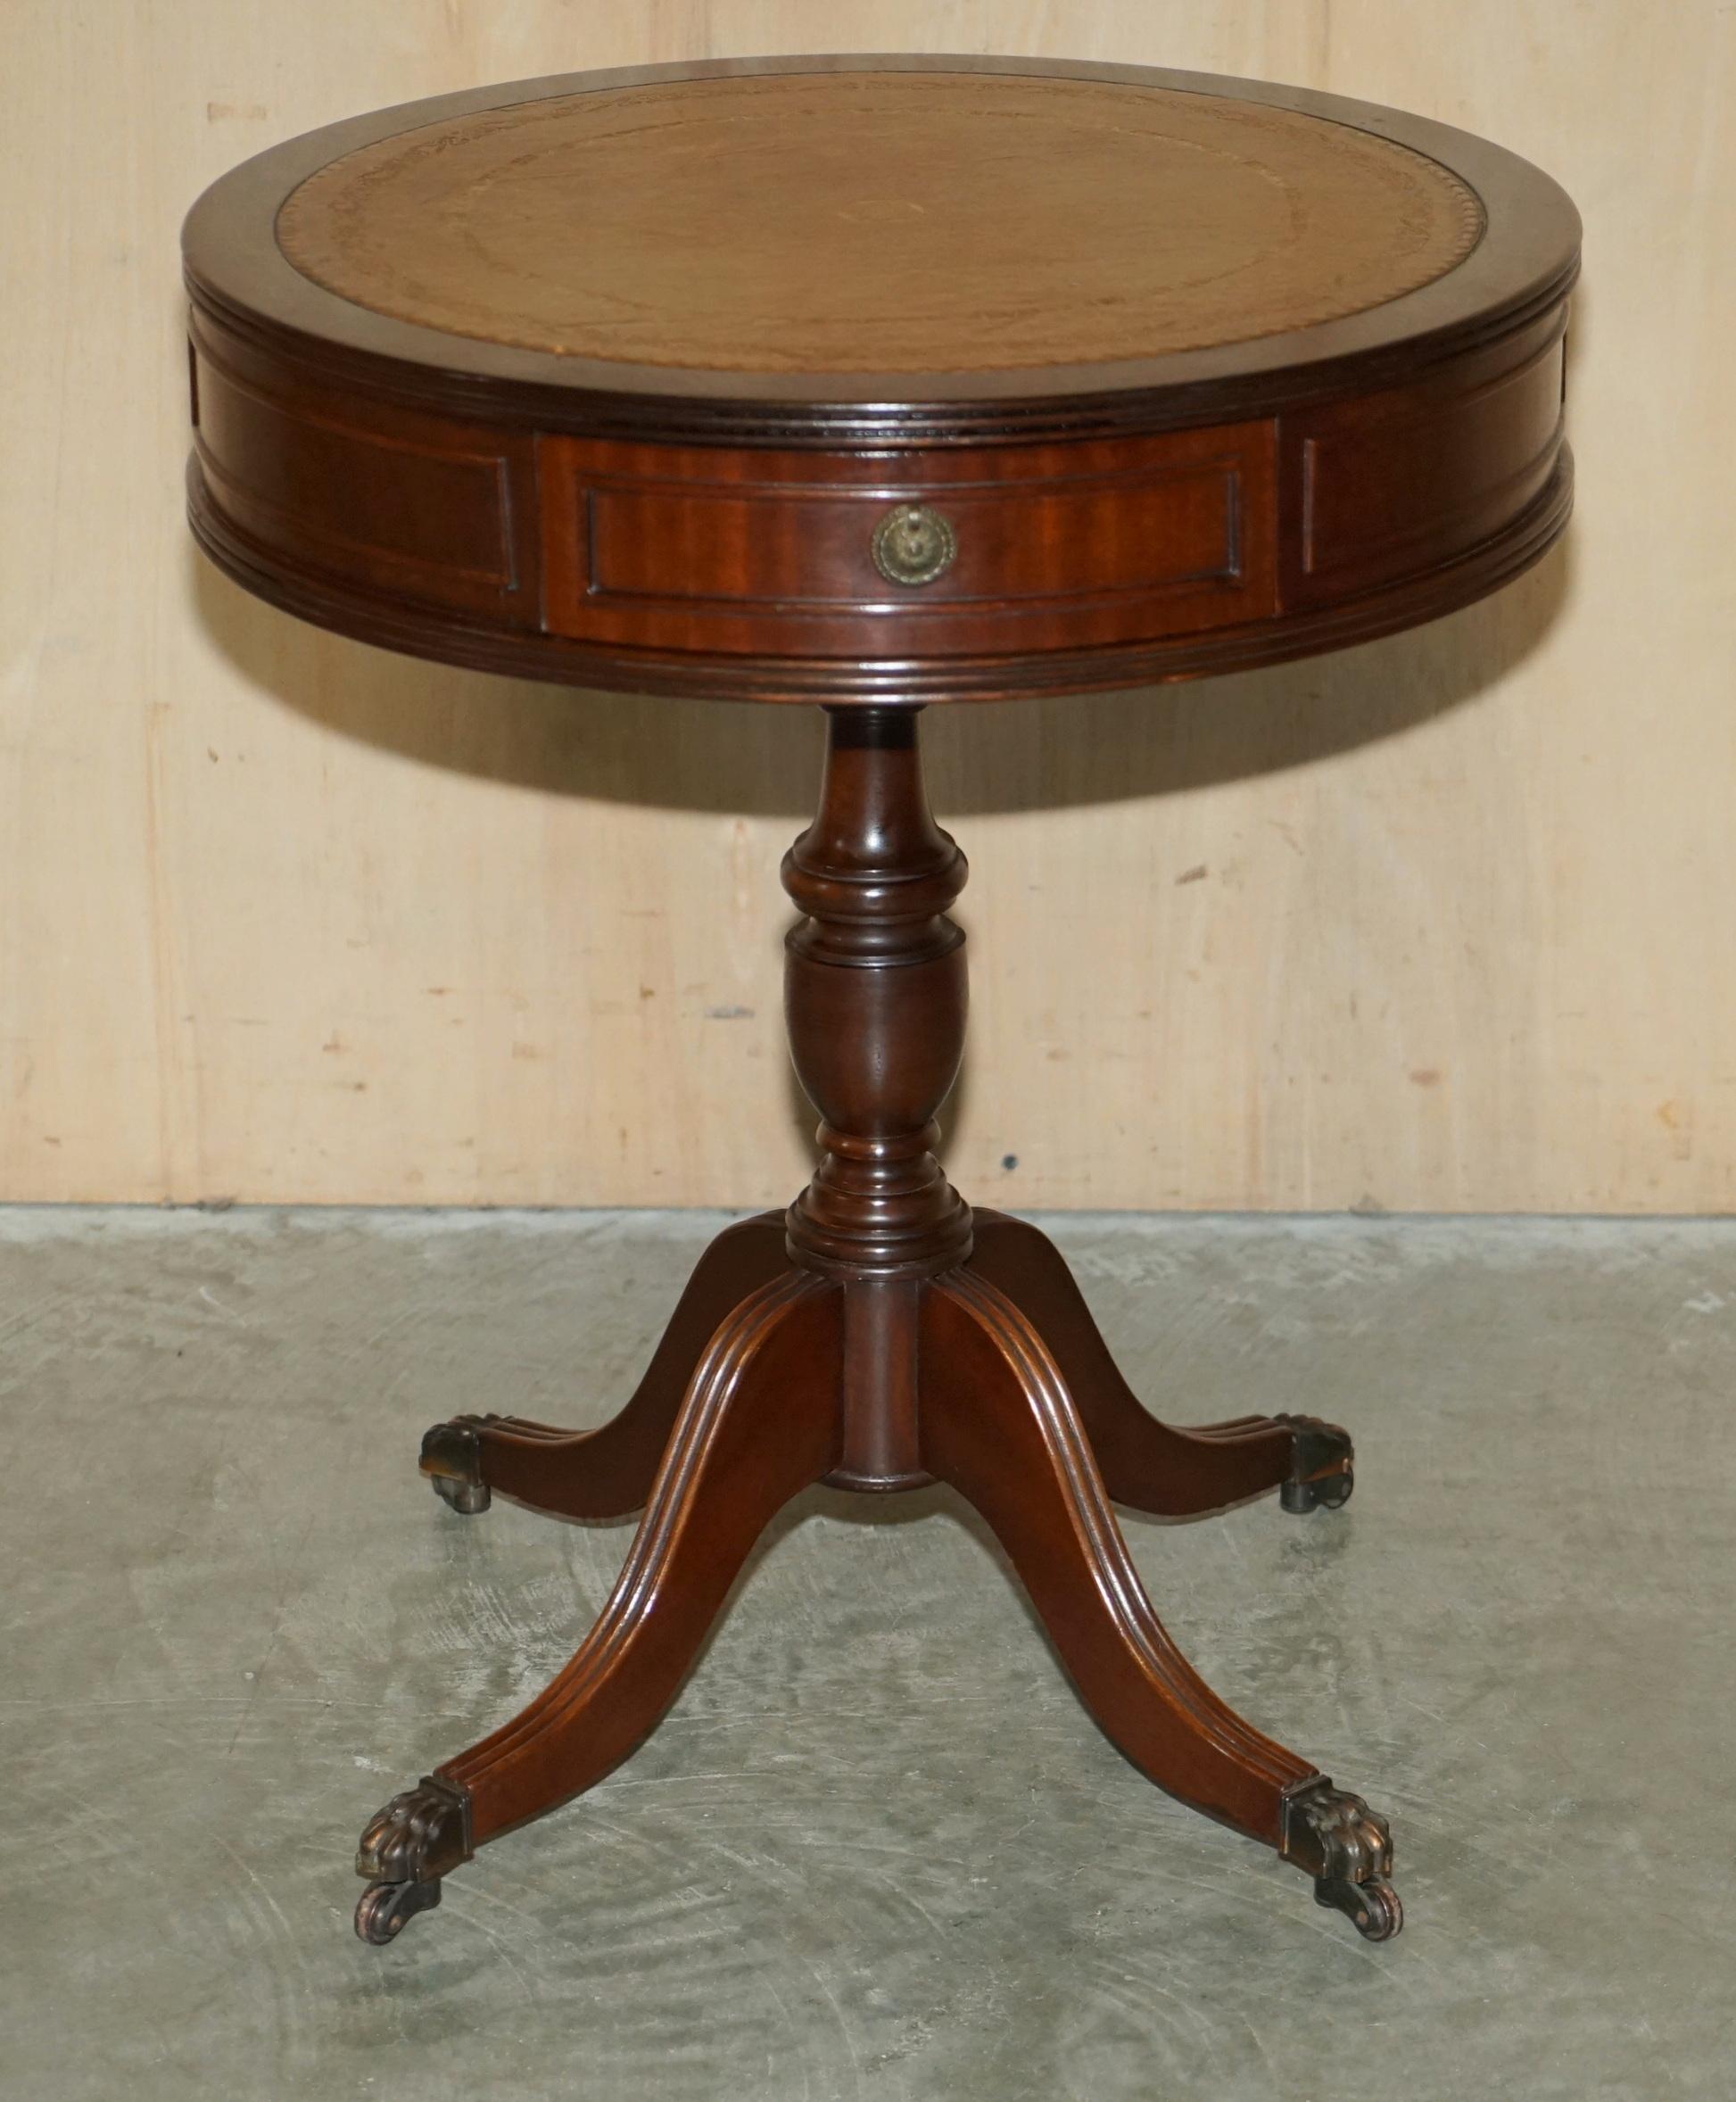 We are delighted to offer for sale this Regency style drum table with beech wood frame and hand dyed green leather top with gold leaf tooling and twin drawers

A very good looking well made and decorative piece, ideally suited as a lamp wine or